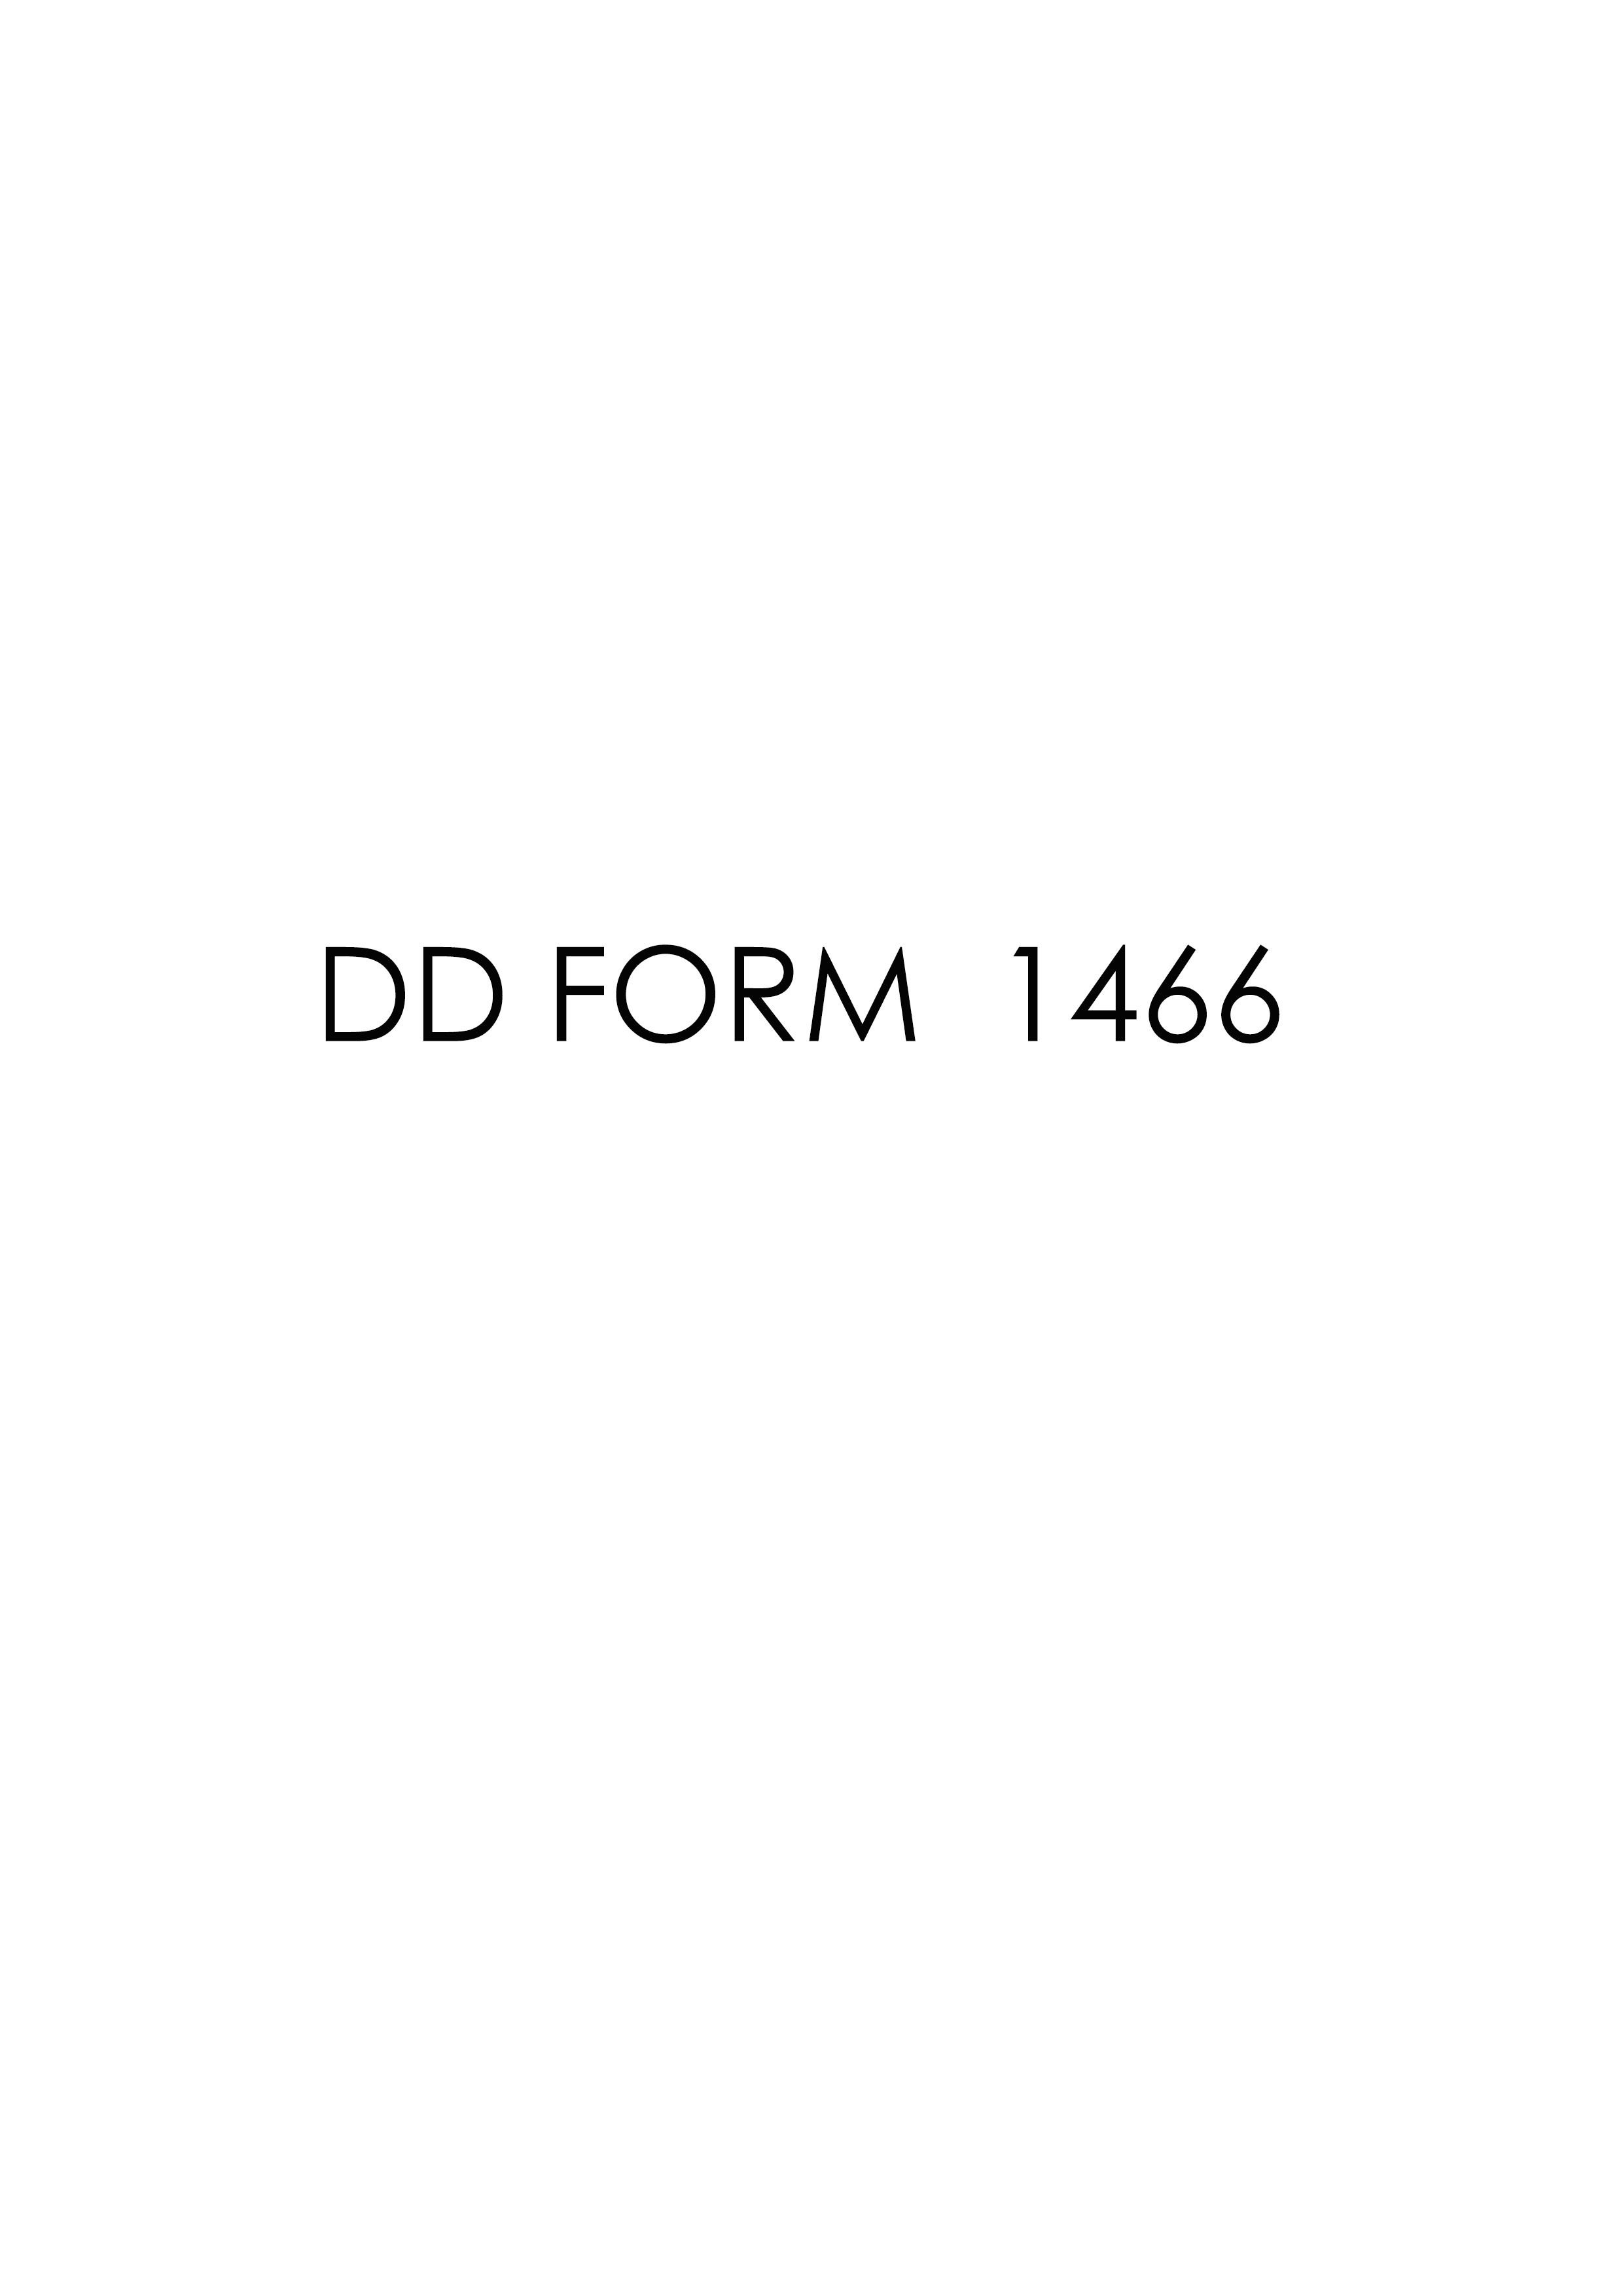 Download Fillable dd Form 1466